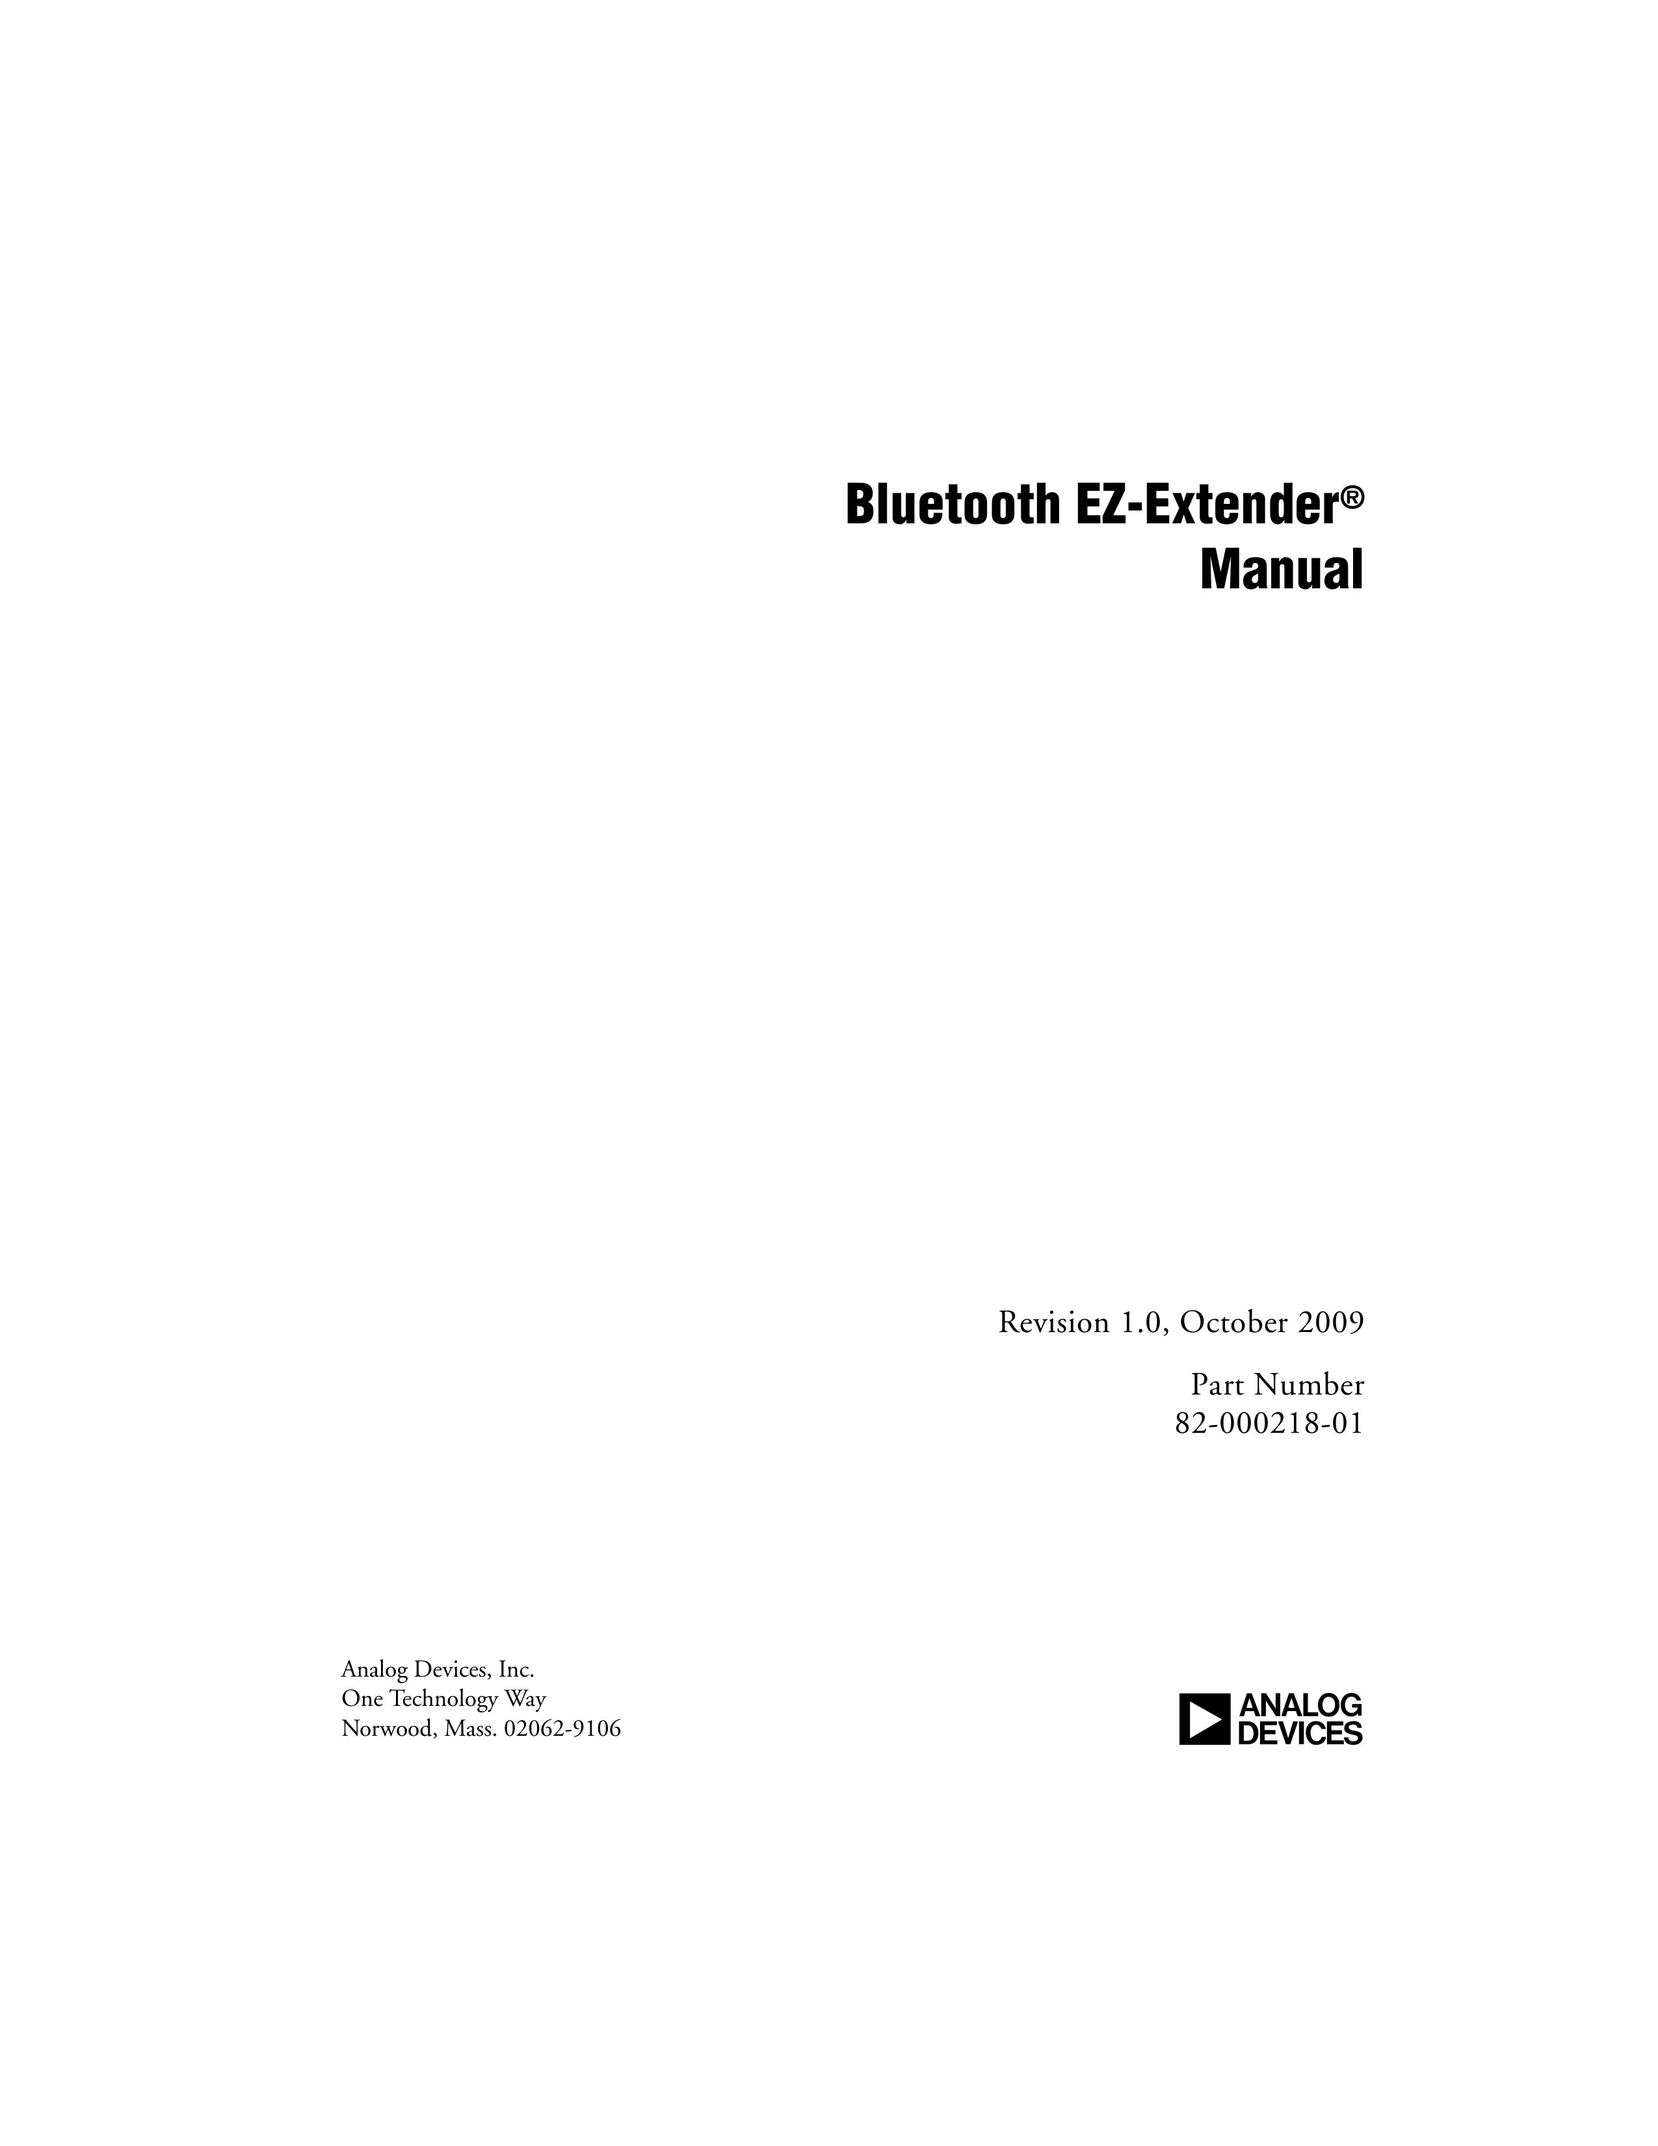 Analog Devices 82-000218-01 Bluetooth Headset User Manual